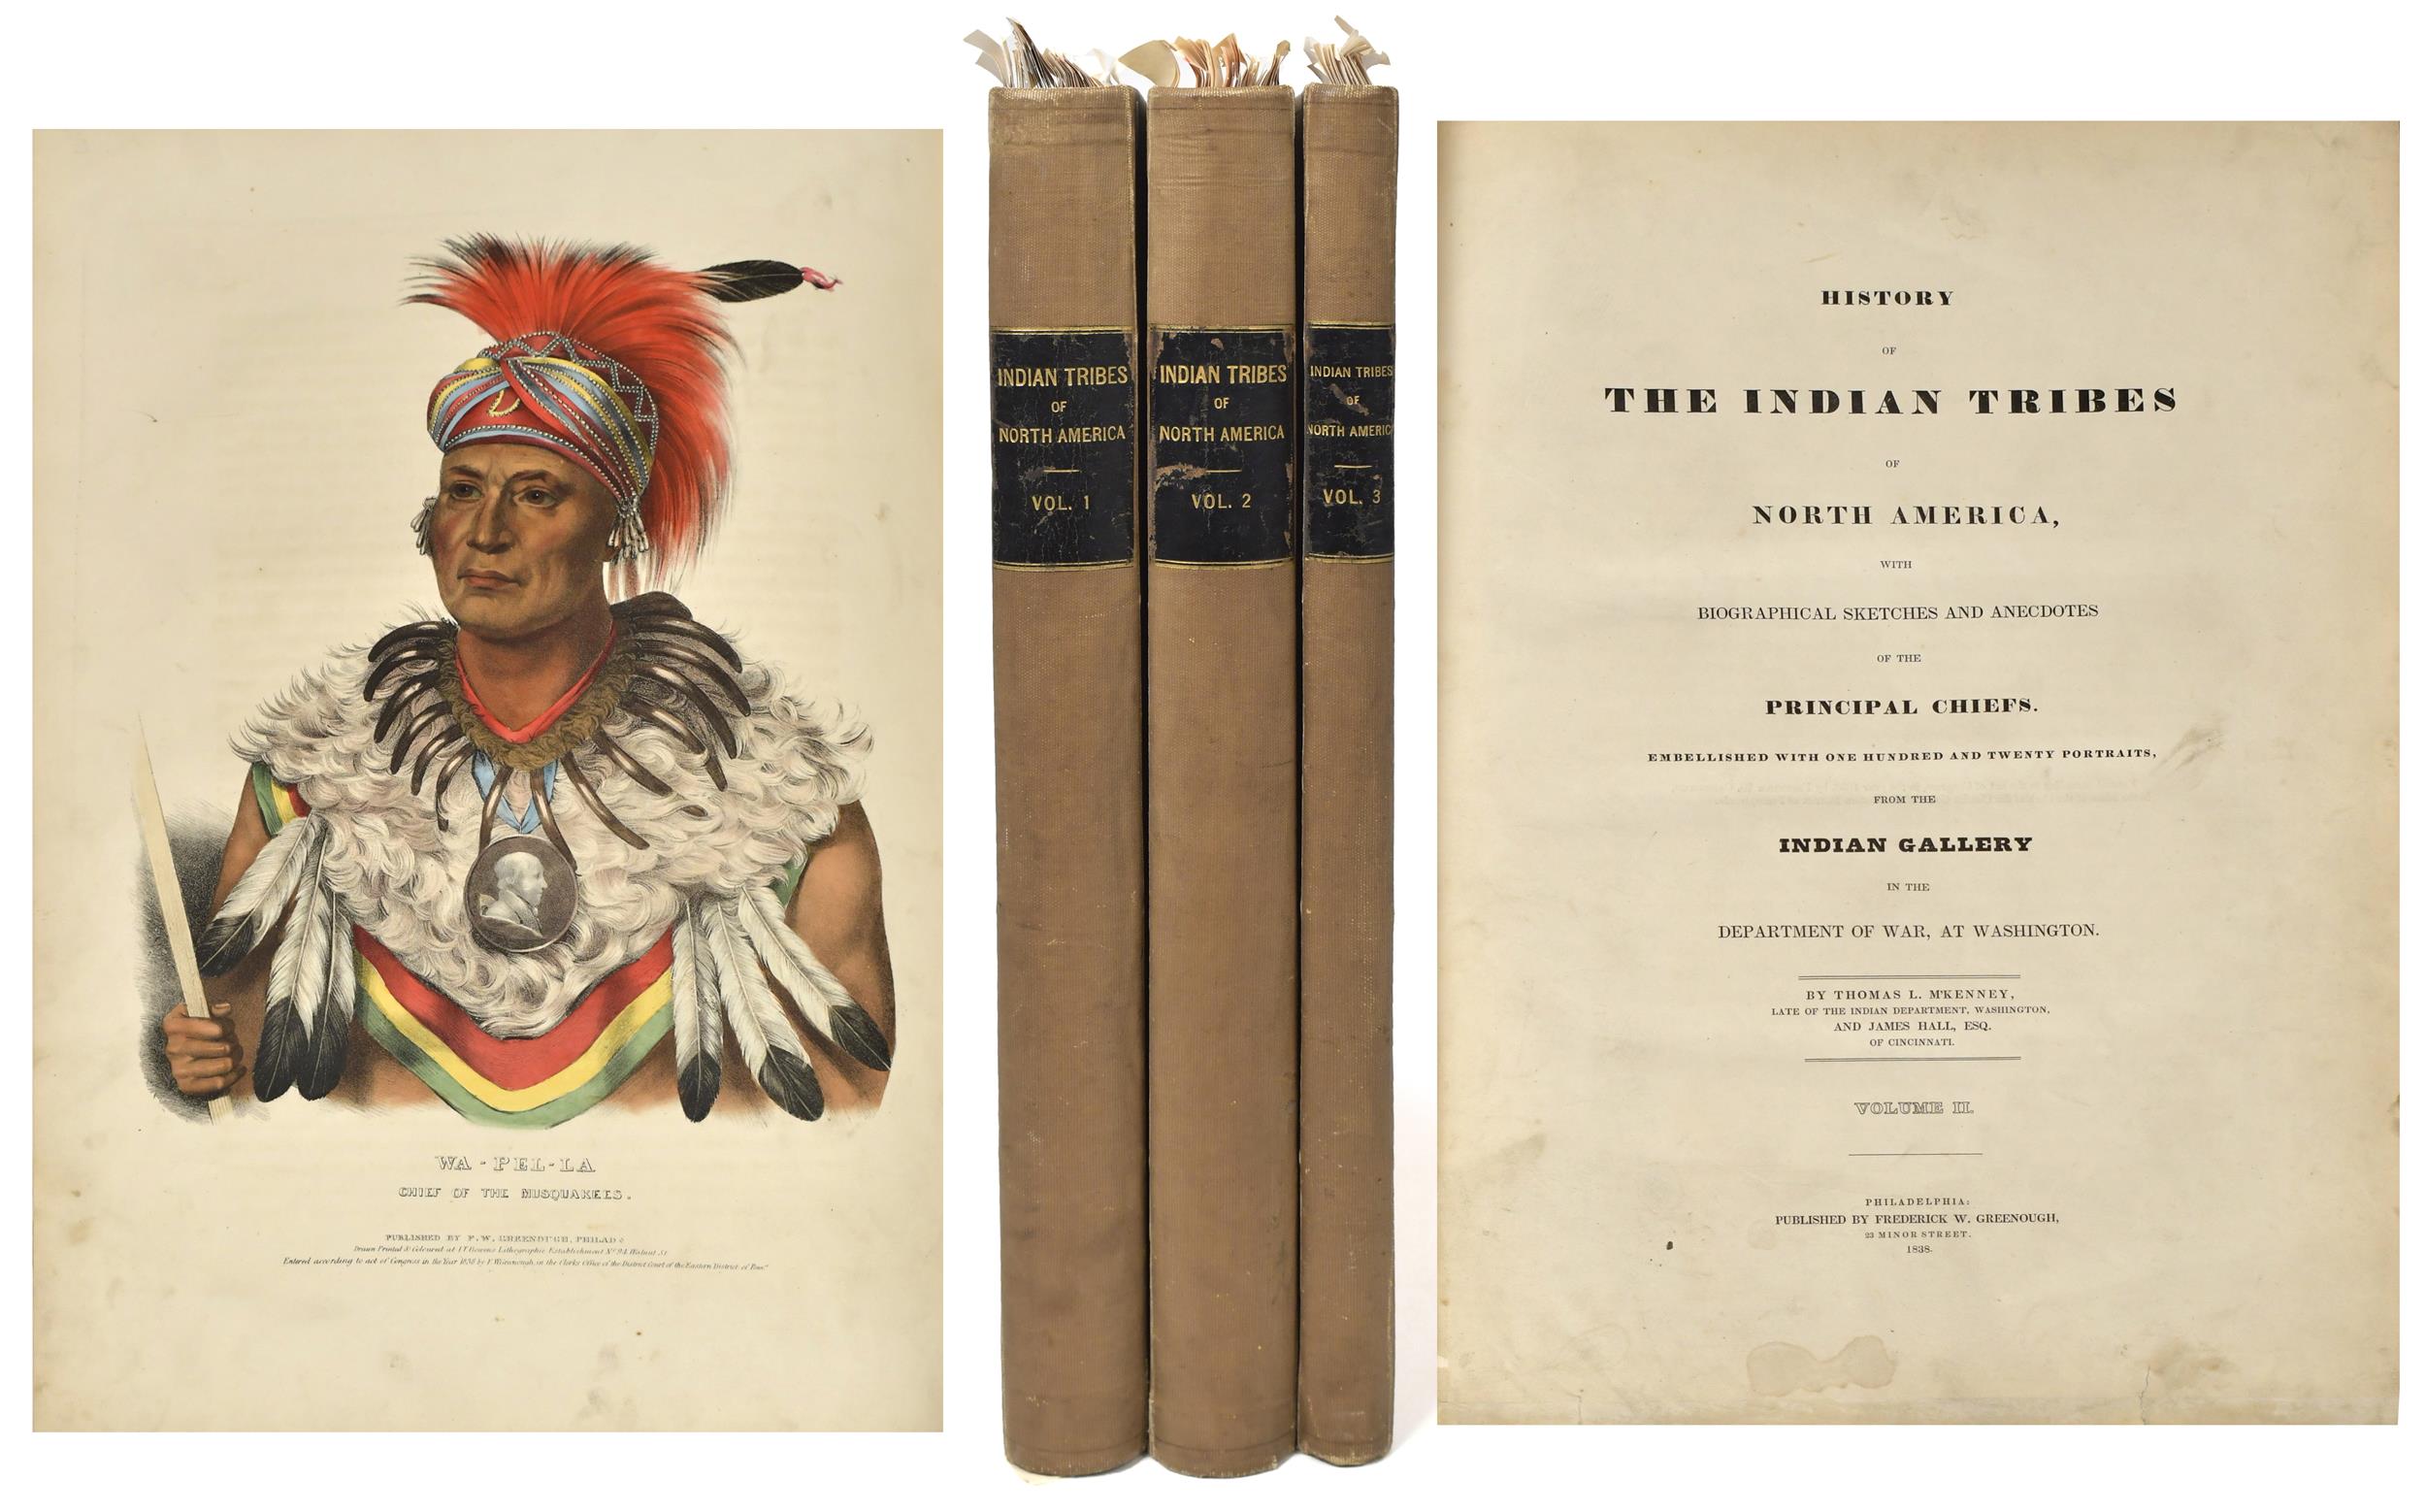 HISTORY OF THE INDIAN TRIBES OF 3ab1bd